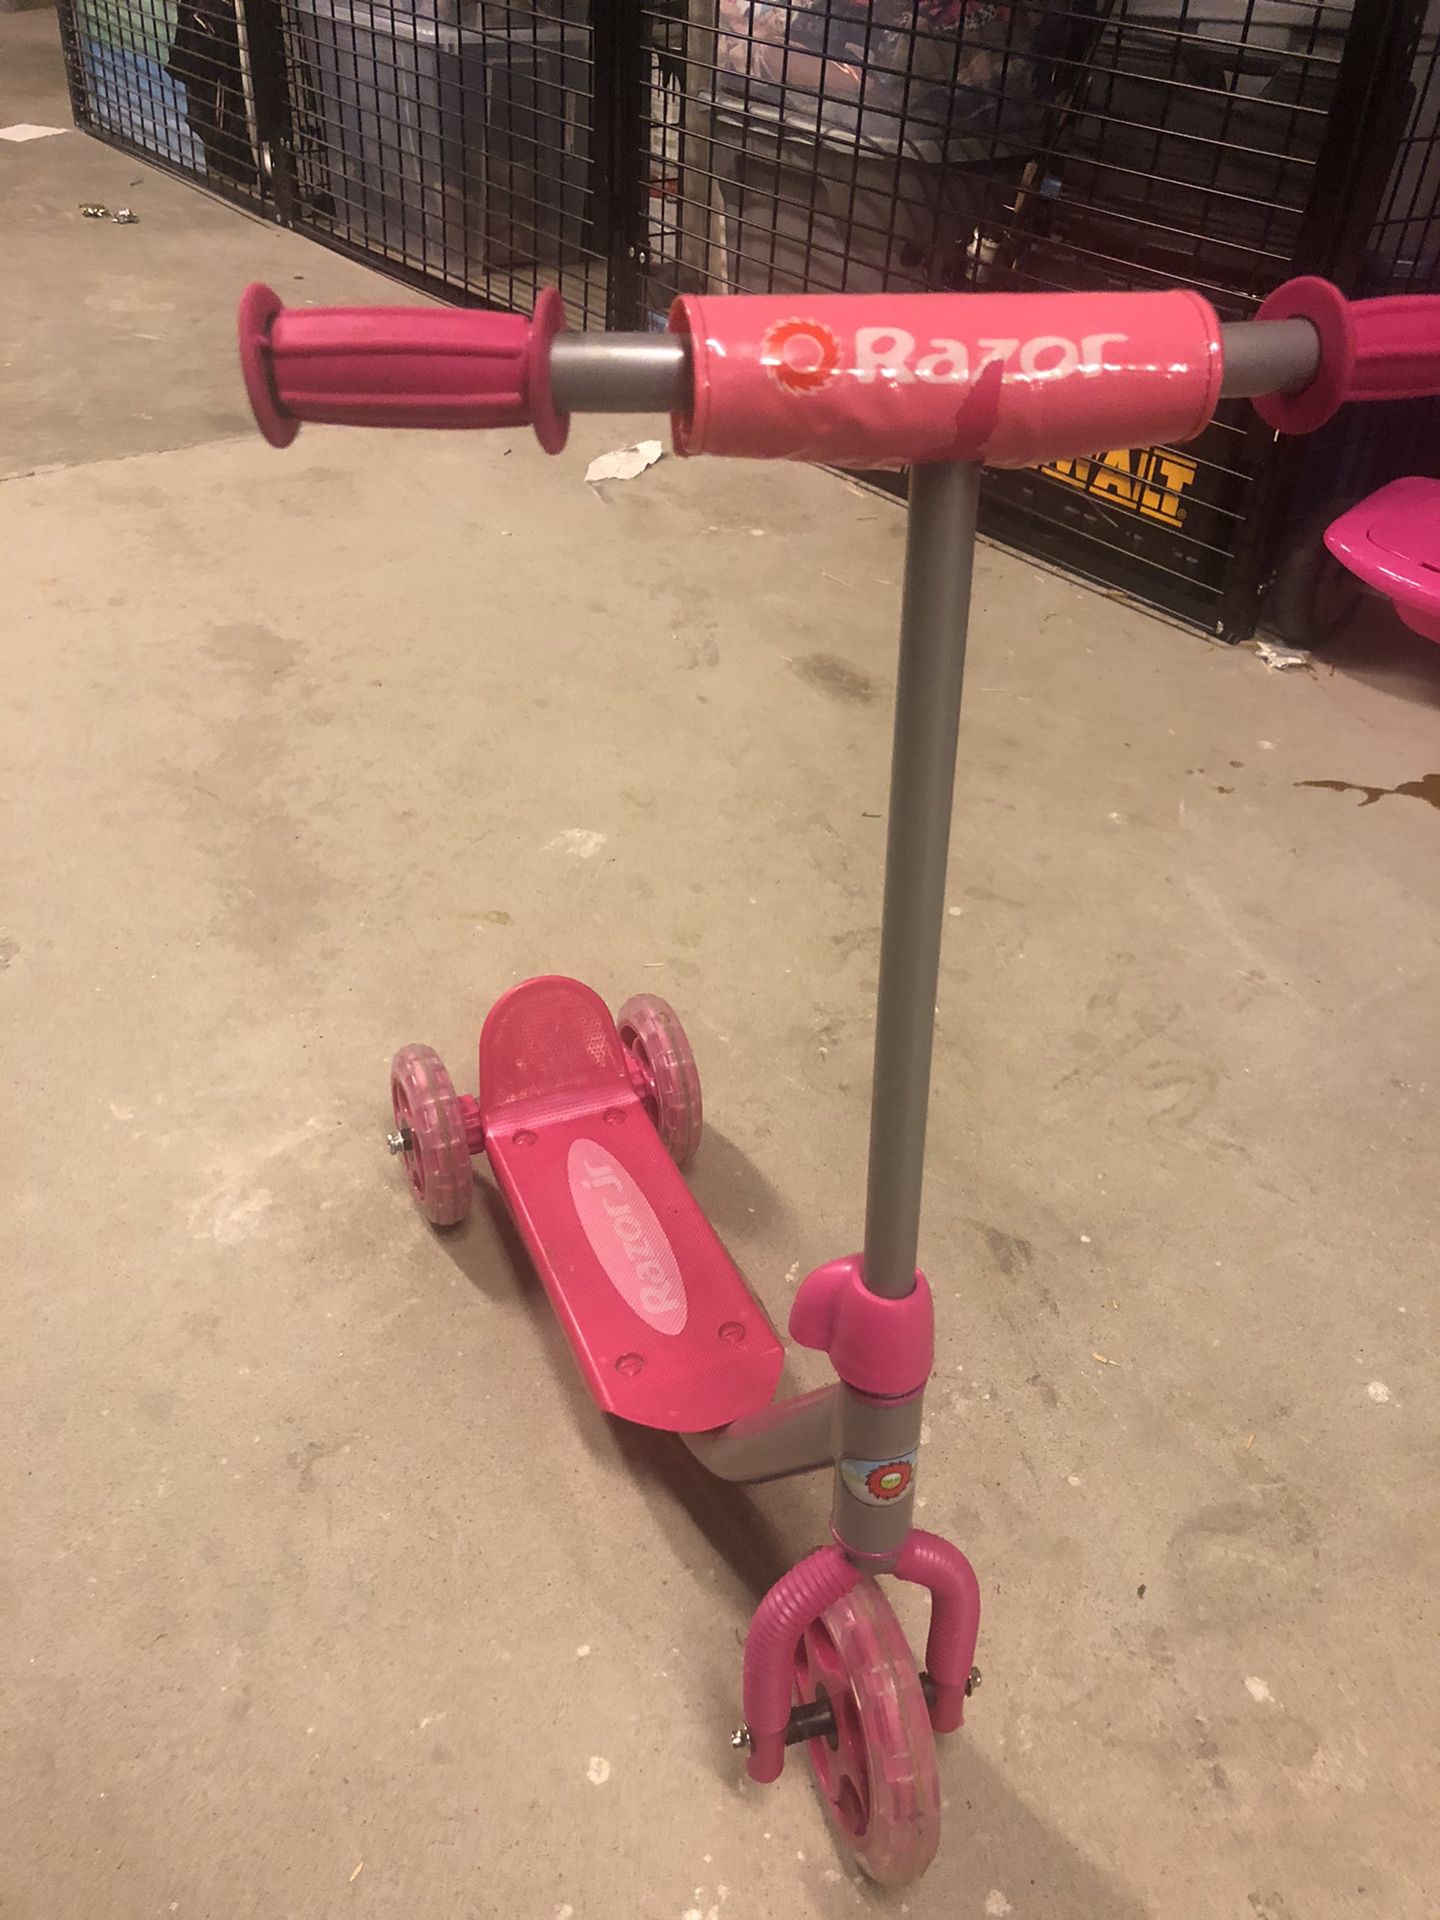 Scooter for a girl $10